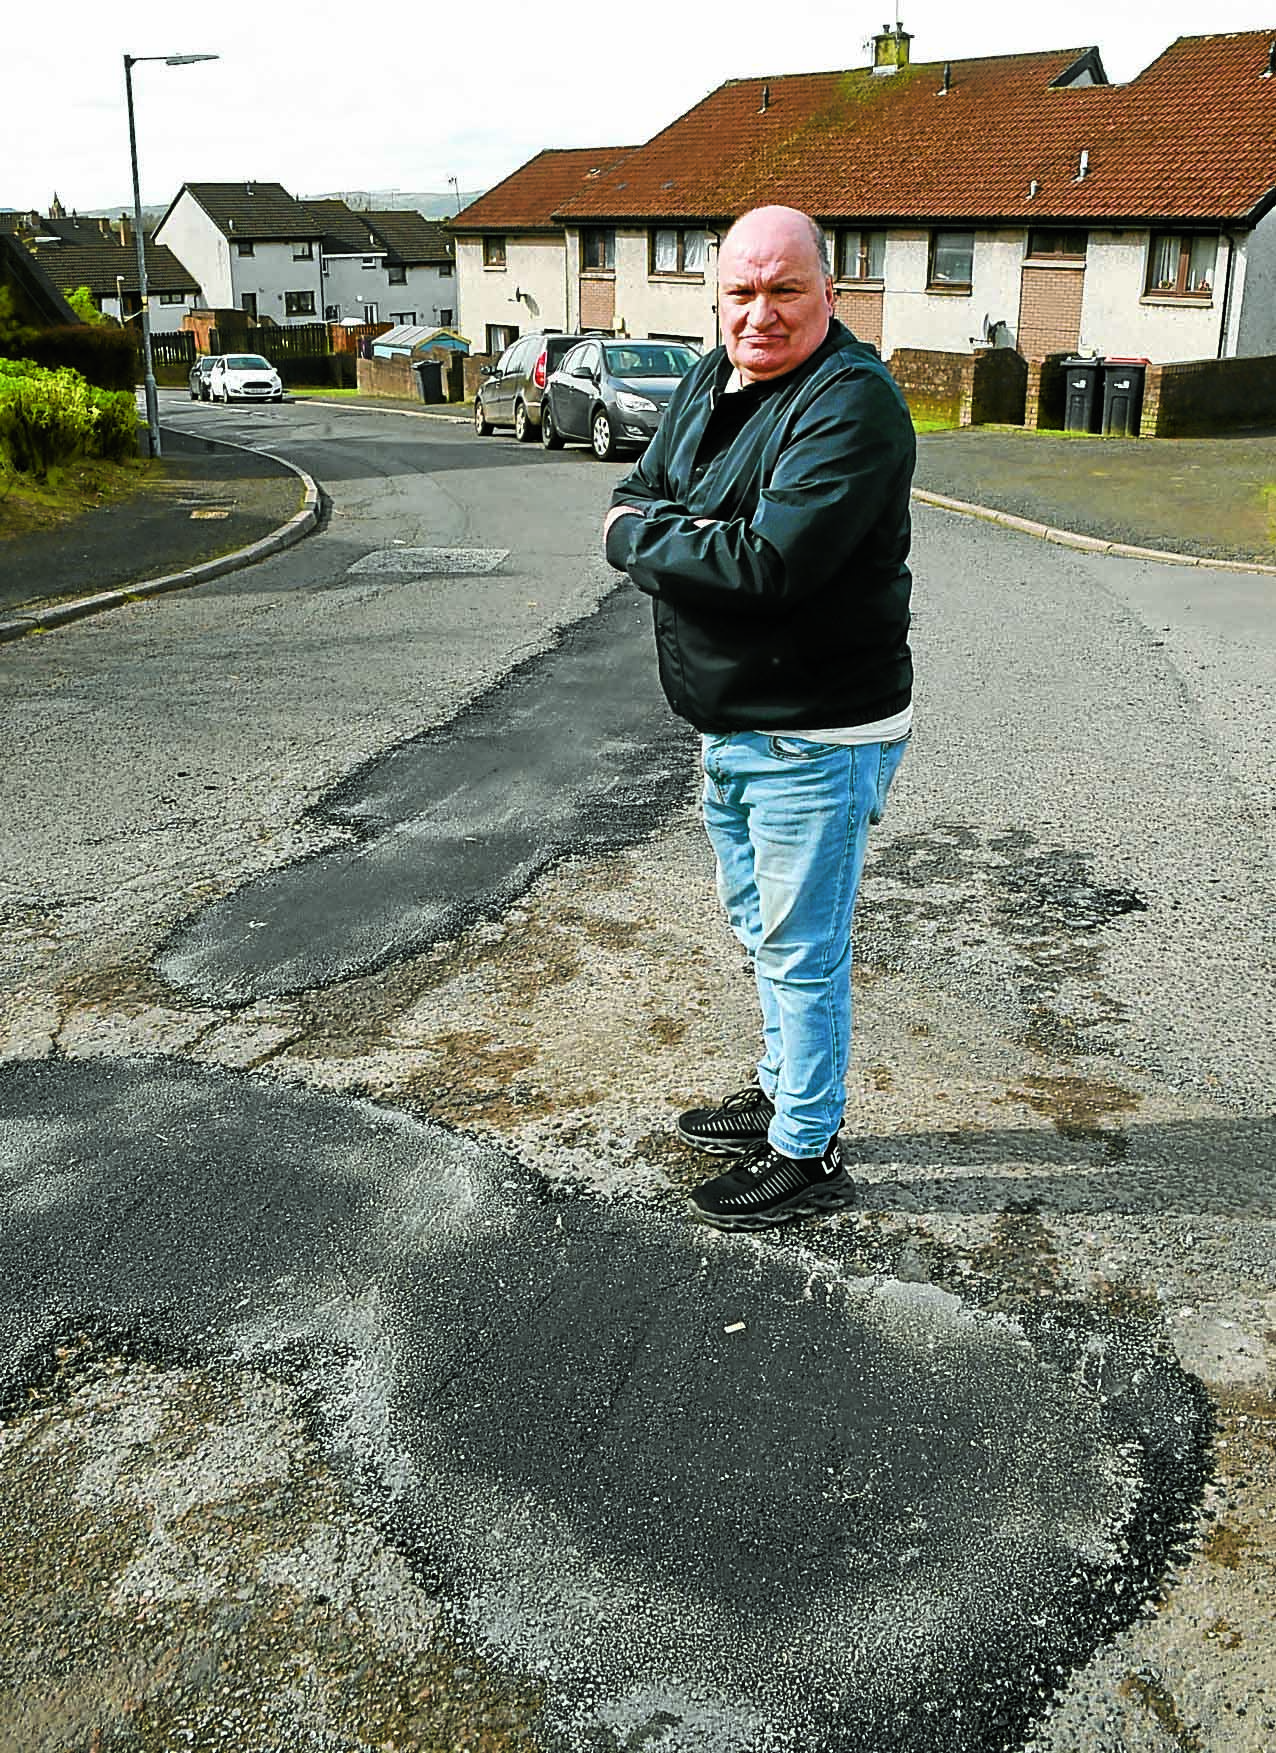 Second time lucky for road repairs